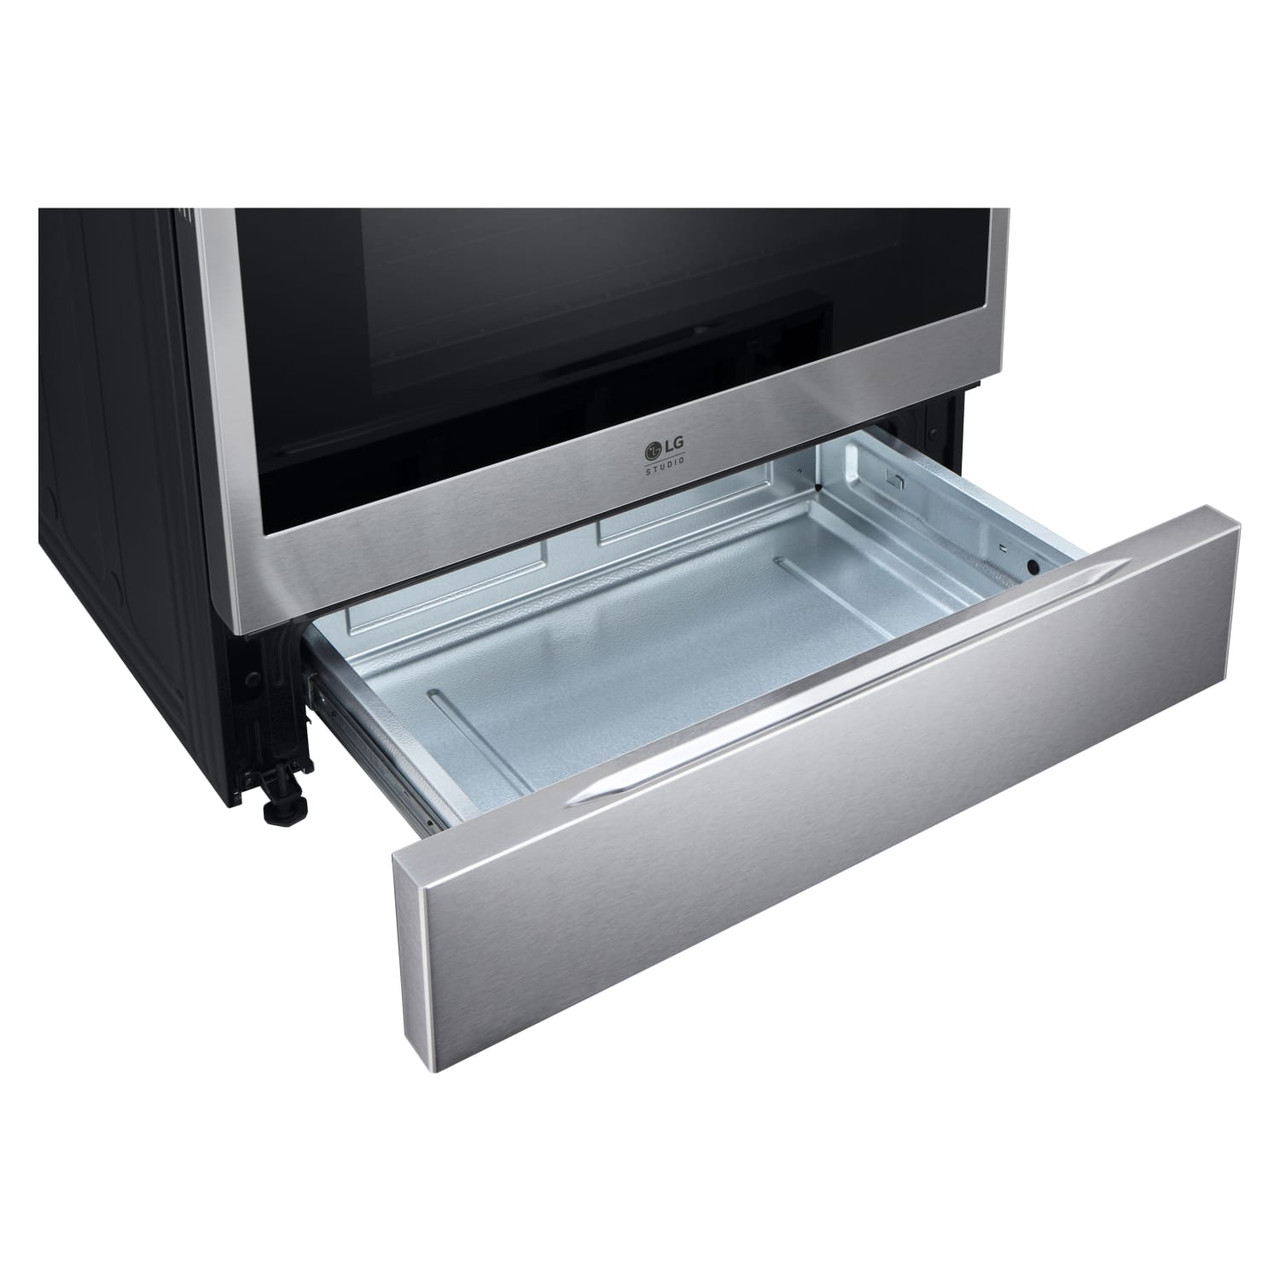 LG Studio 6.3 cu. ft. Gas Slide-In Range with ProBake Convection®, InstaView®, and EasyClean® - LSGS6338F